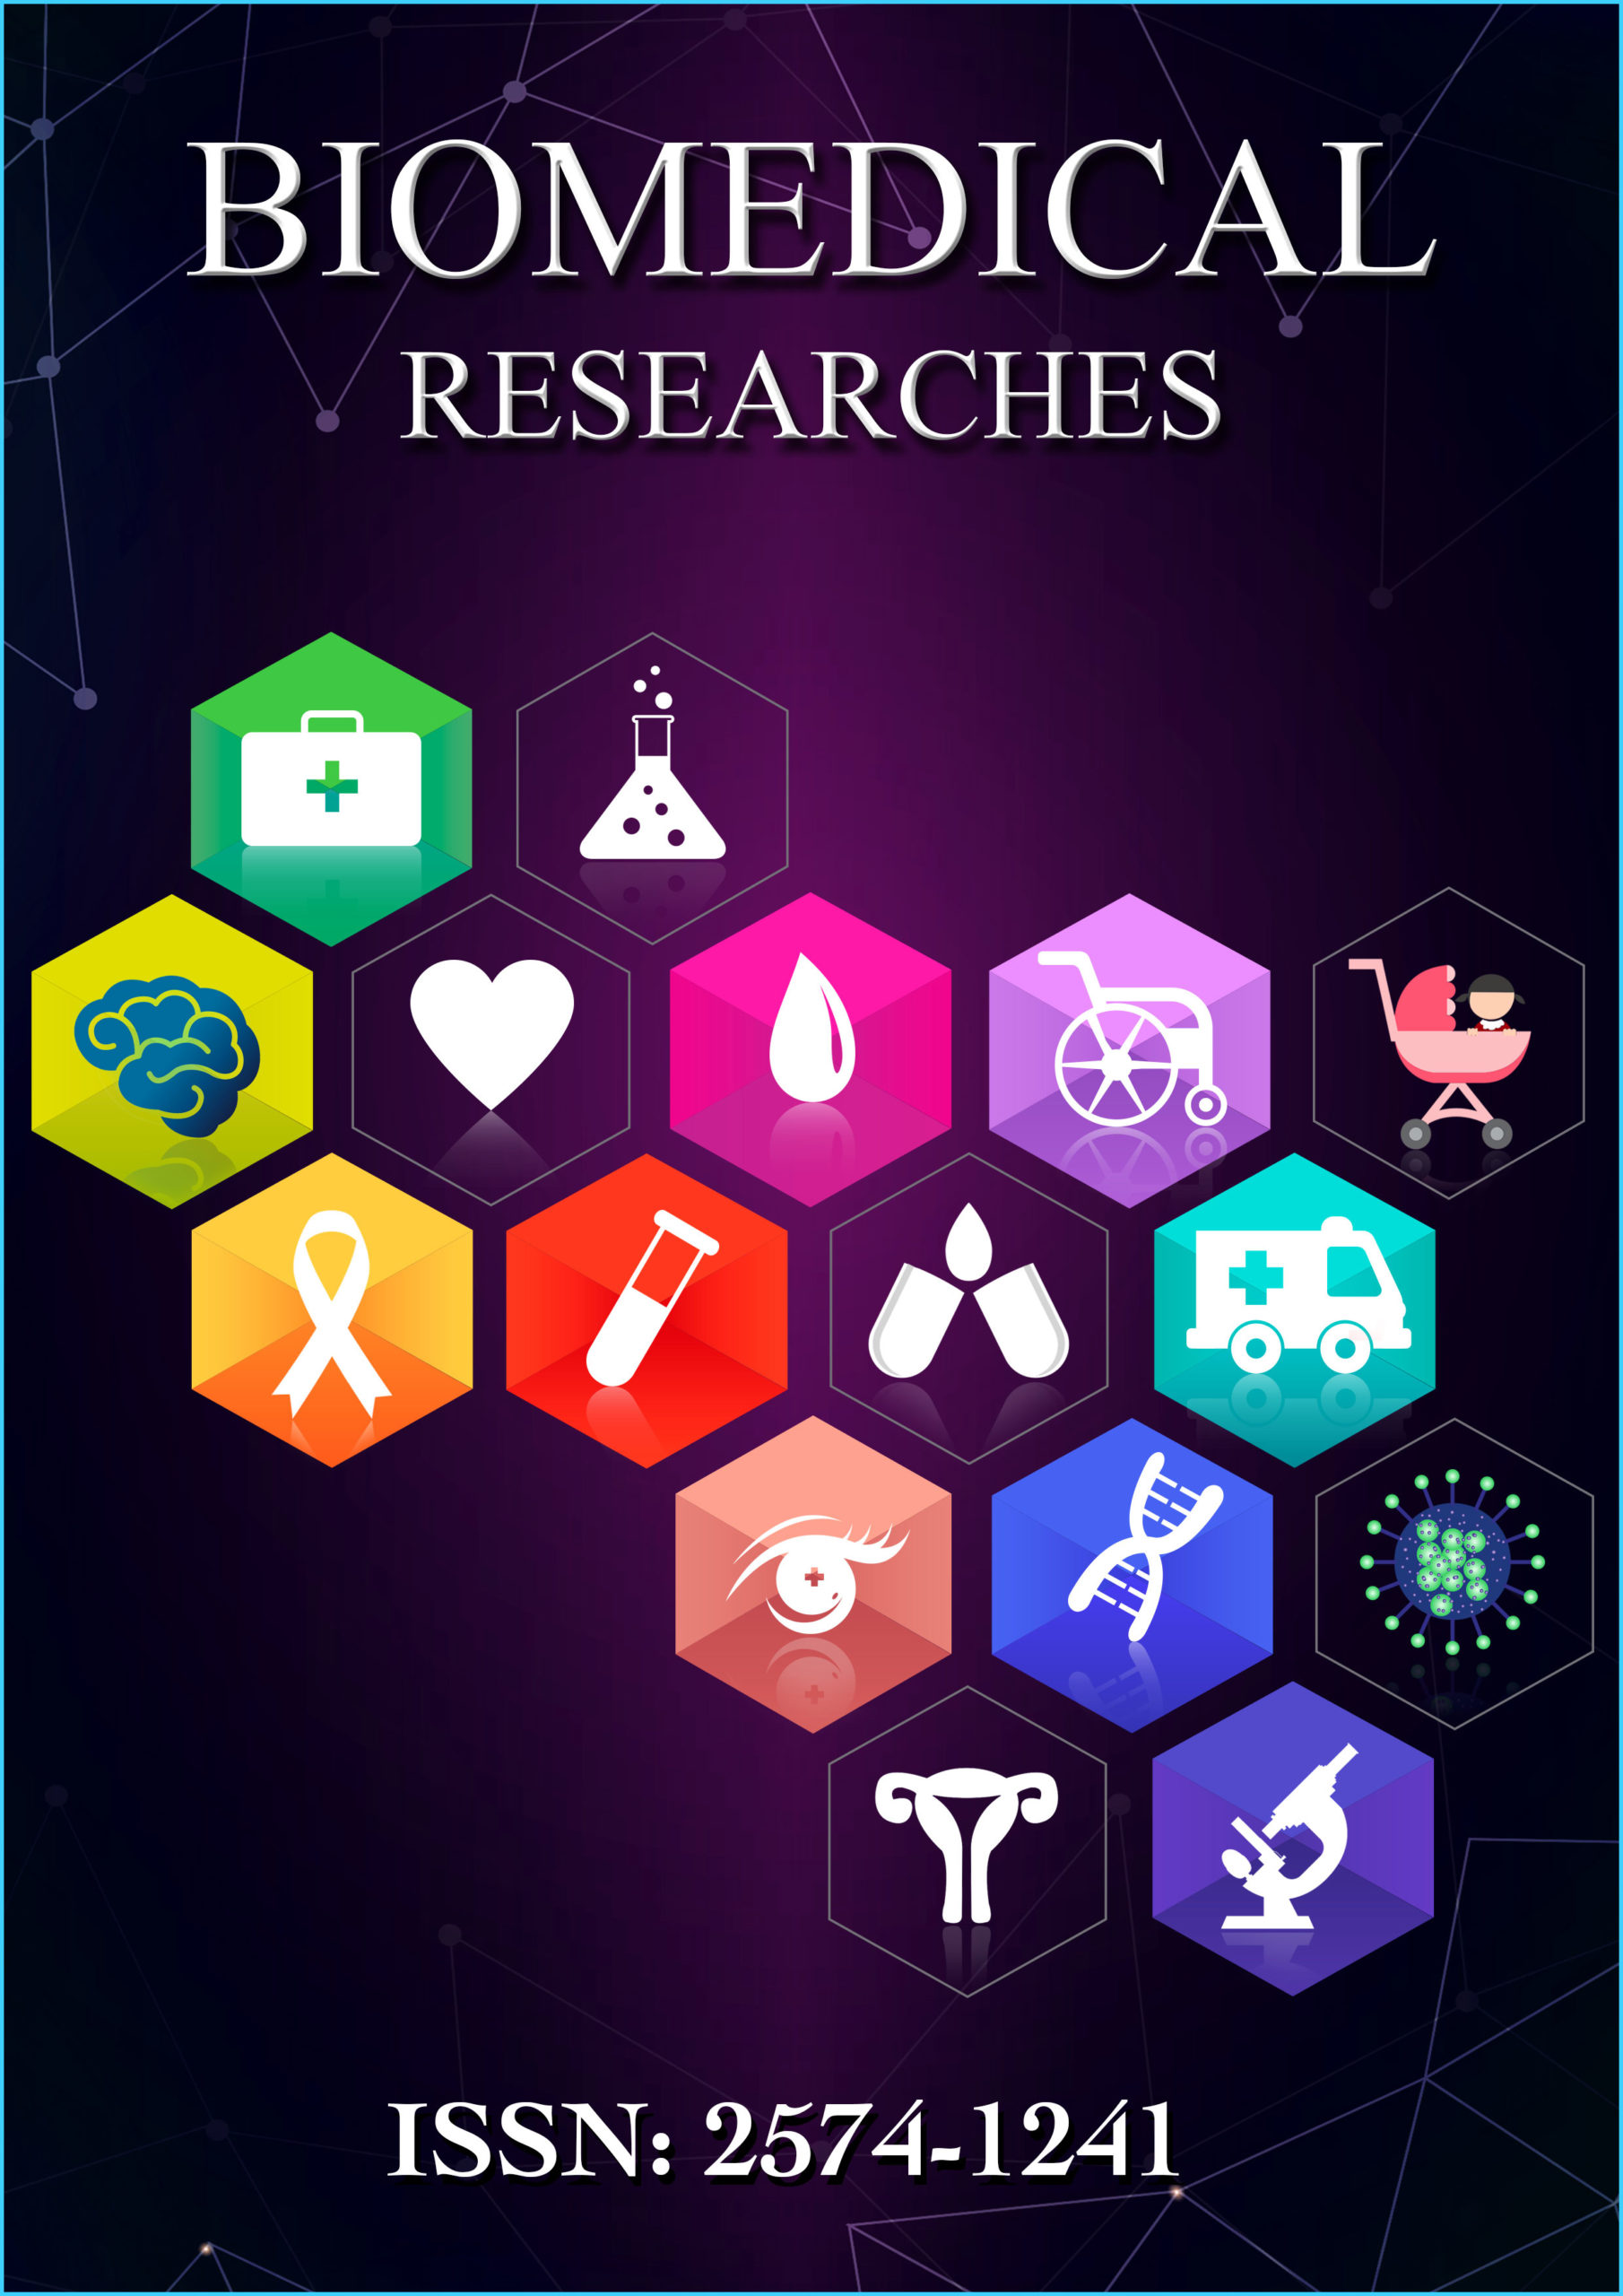 biomedical research journal publication fee